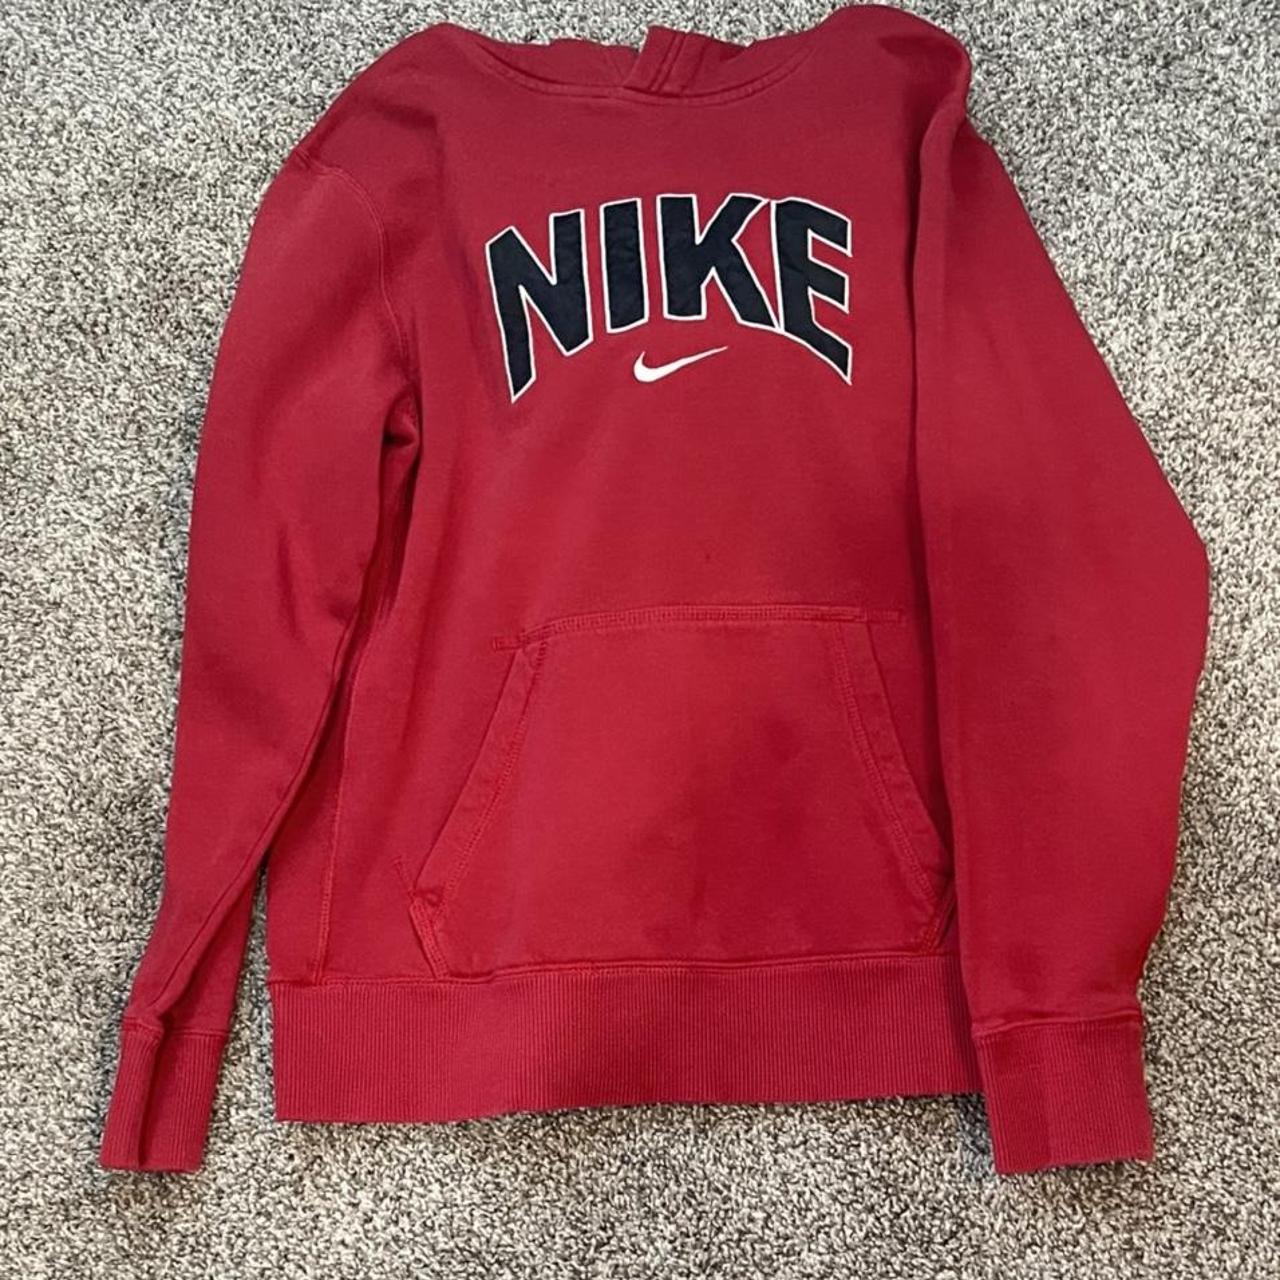 Old Nike Hoodie. It is a kids XL but also fits as an... - Depop